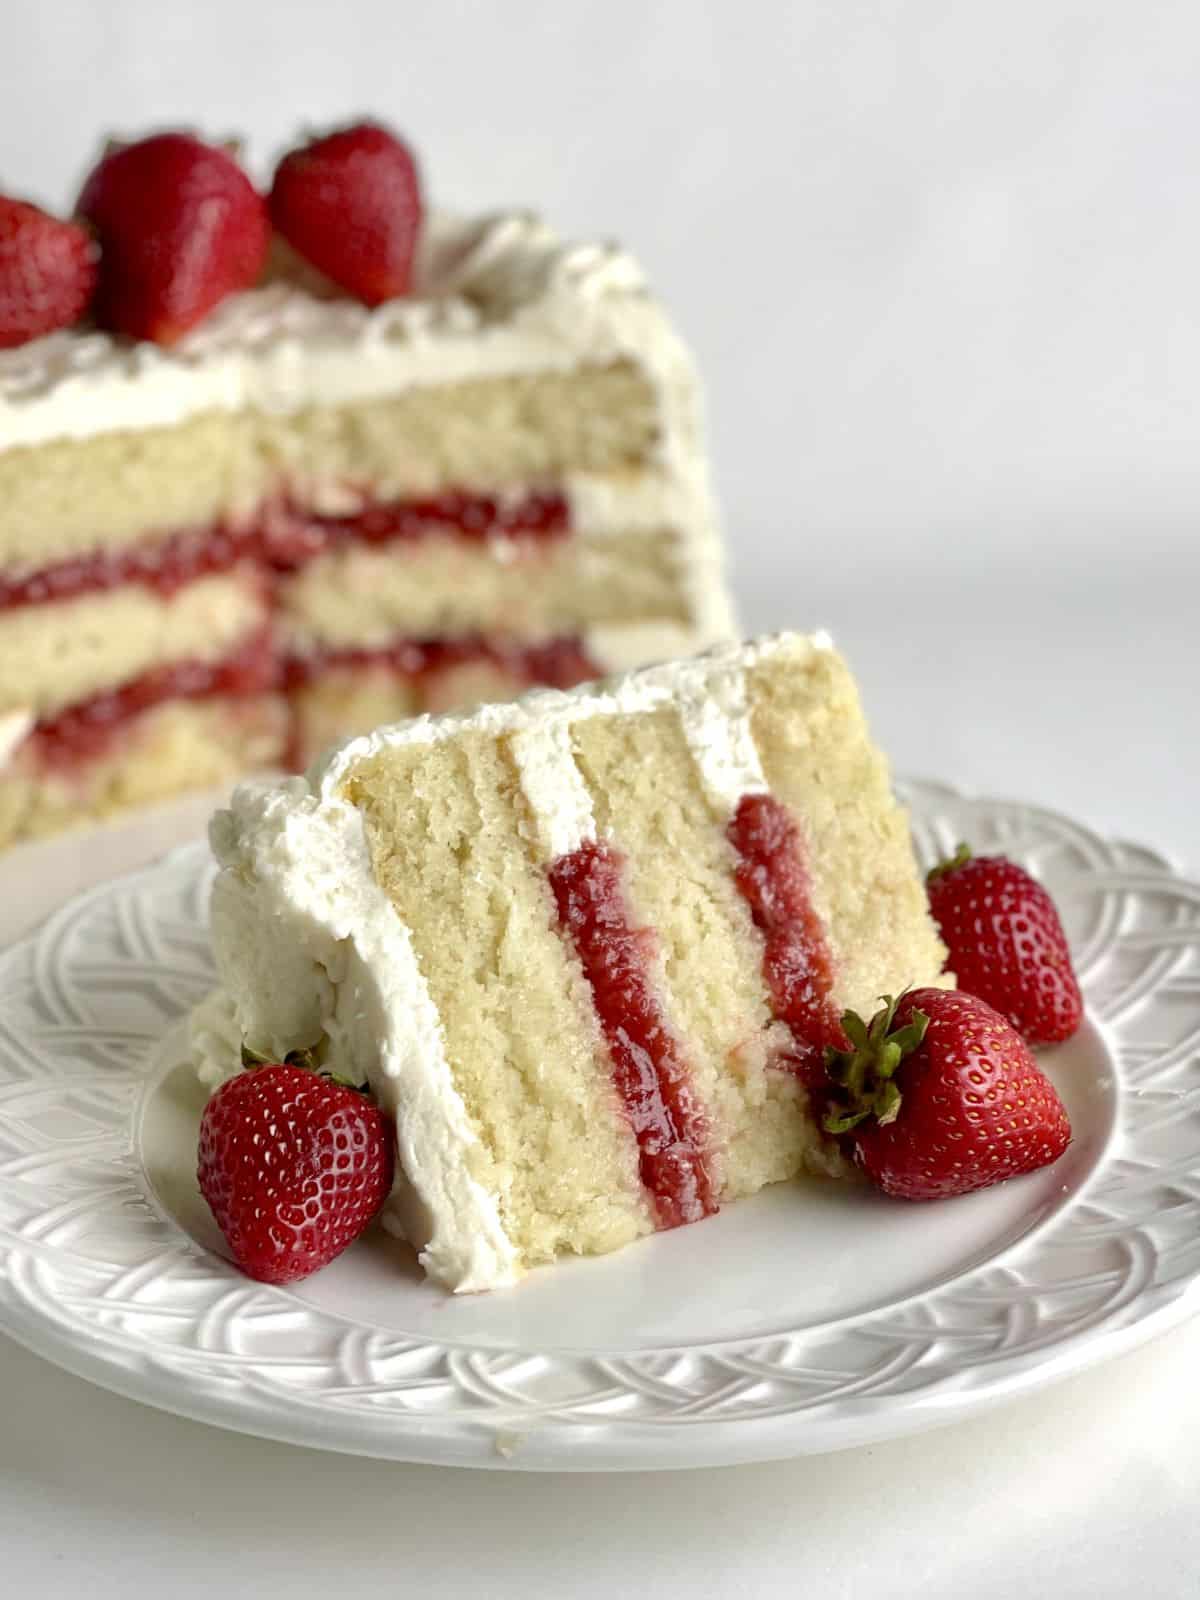 A slice of white cake with strawberry filling on a plate with the layer cake in the background.